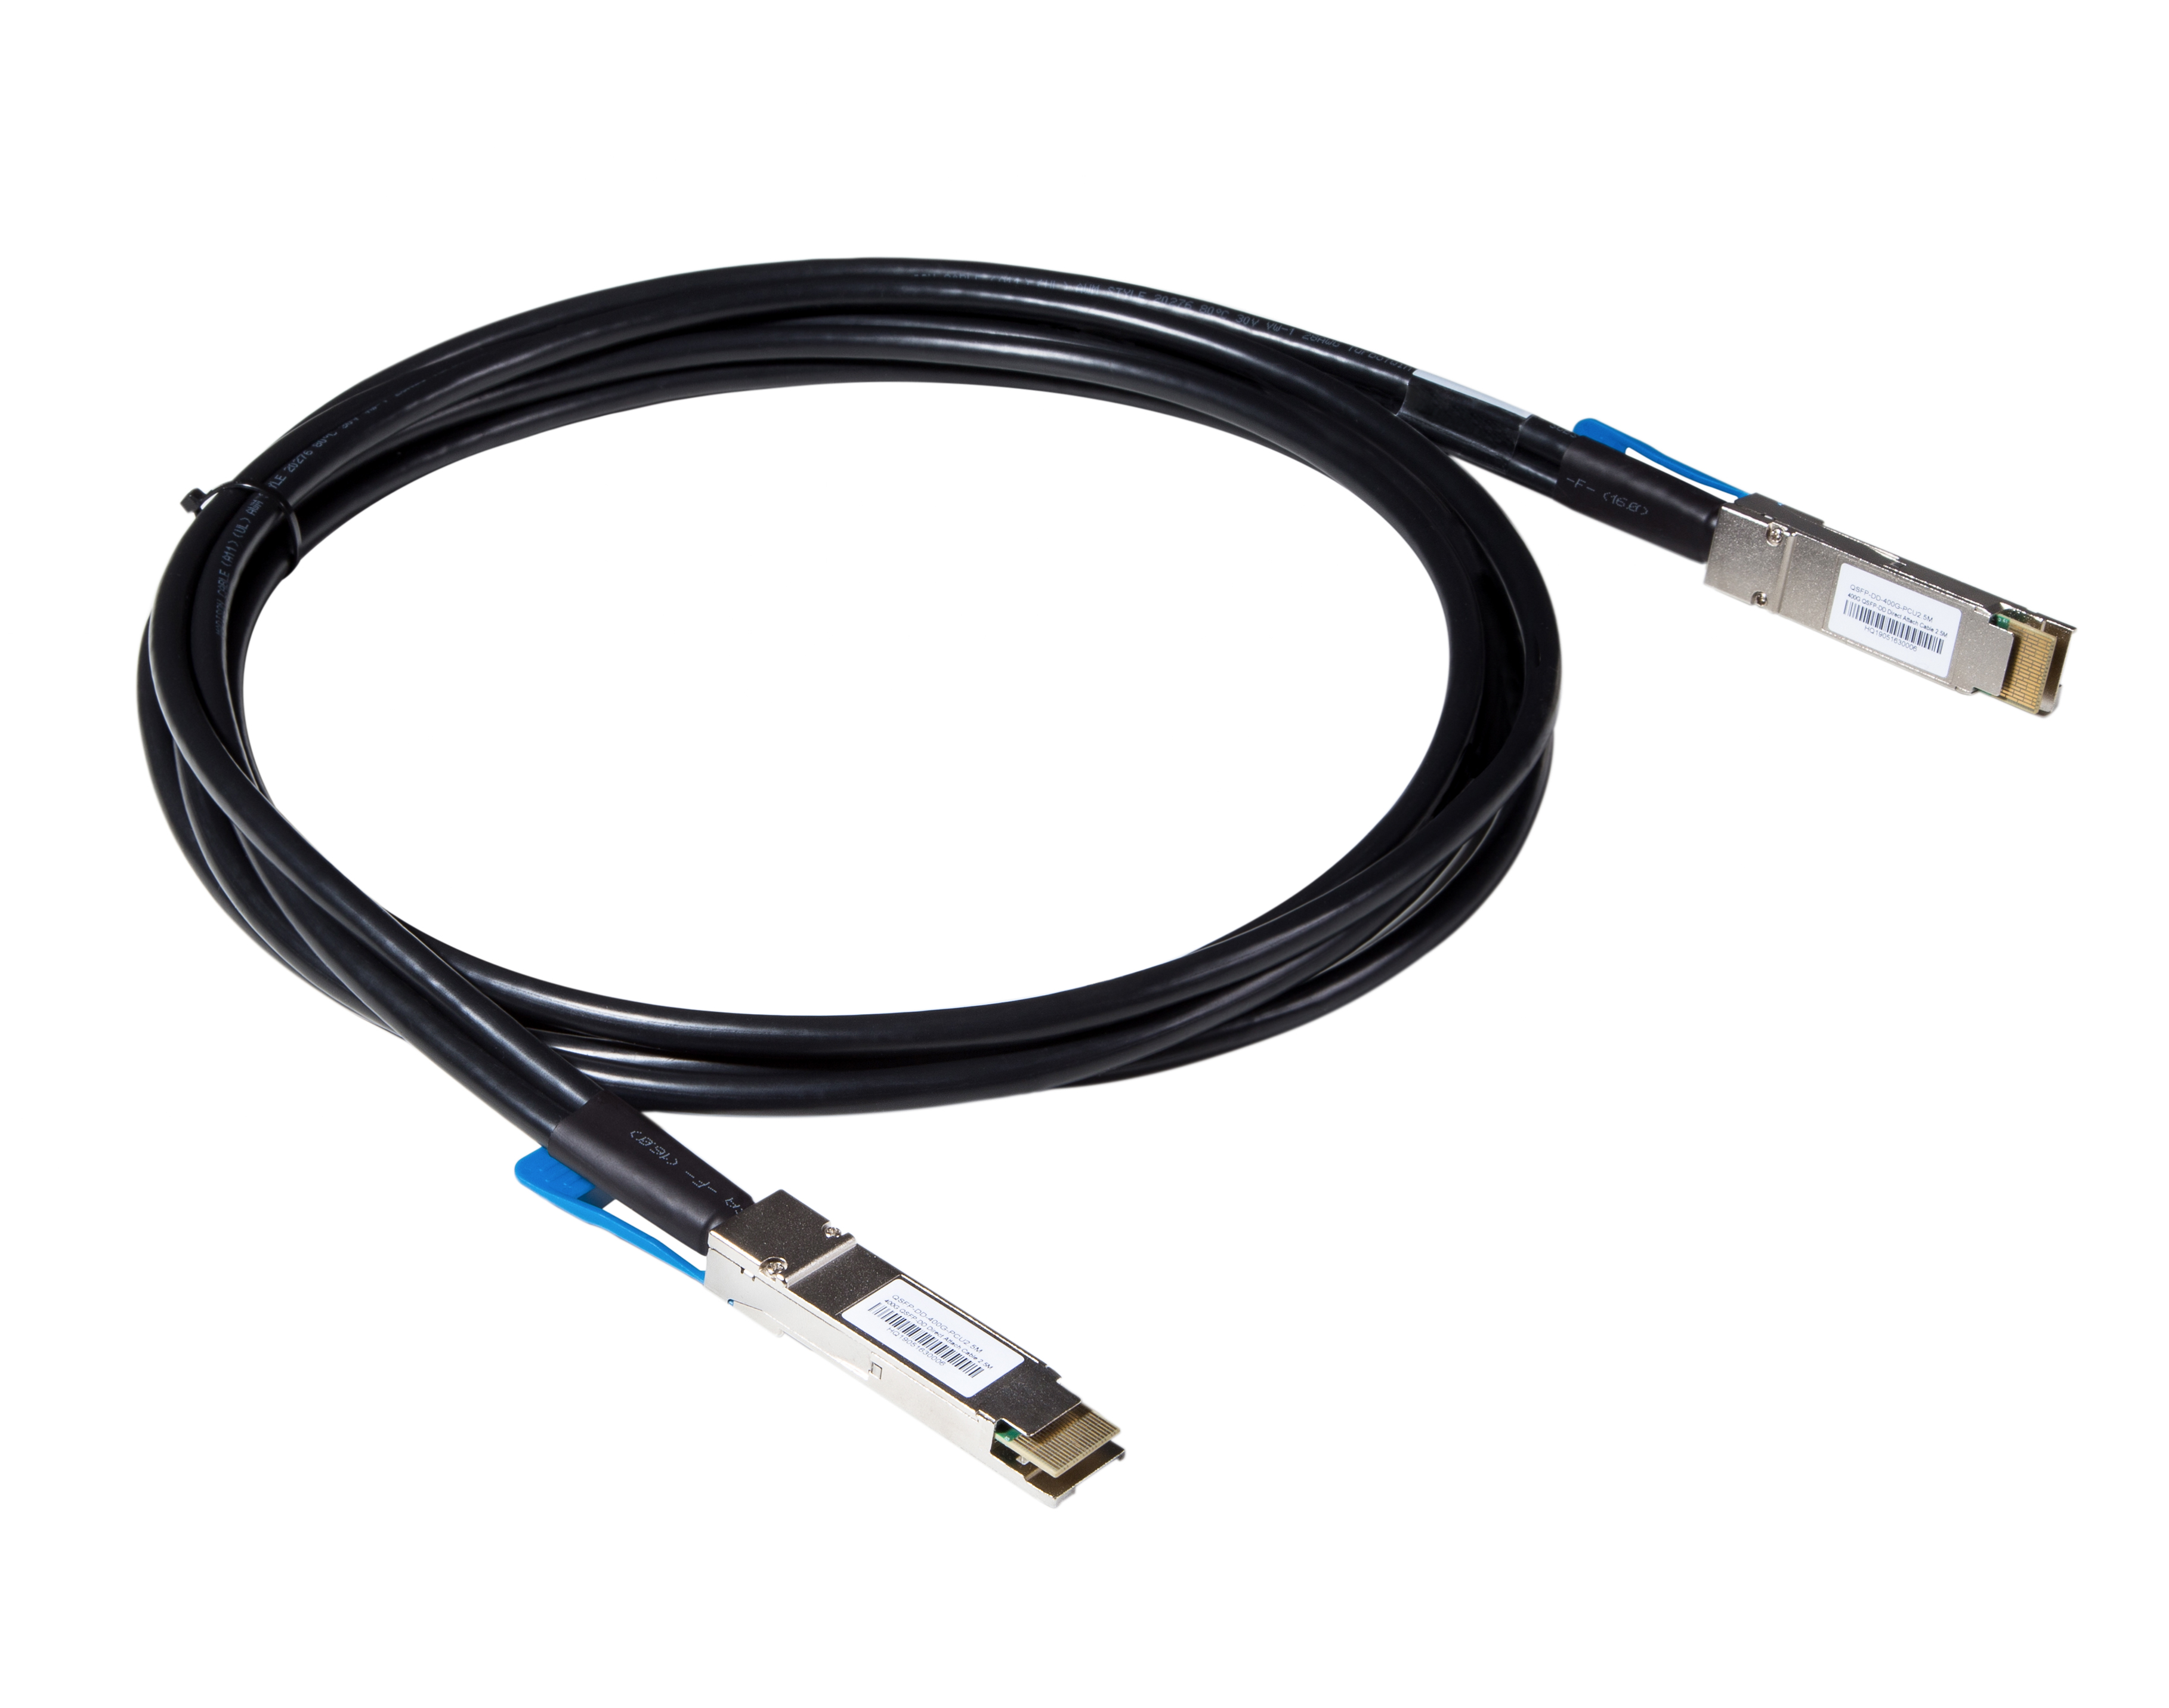 400G DAC cable